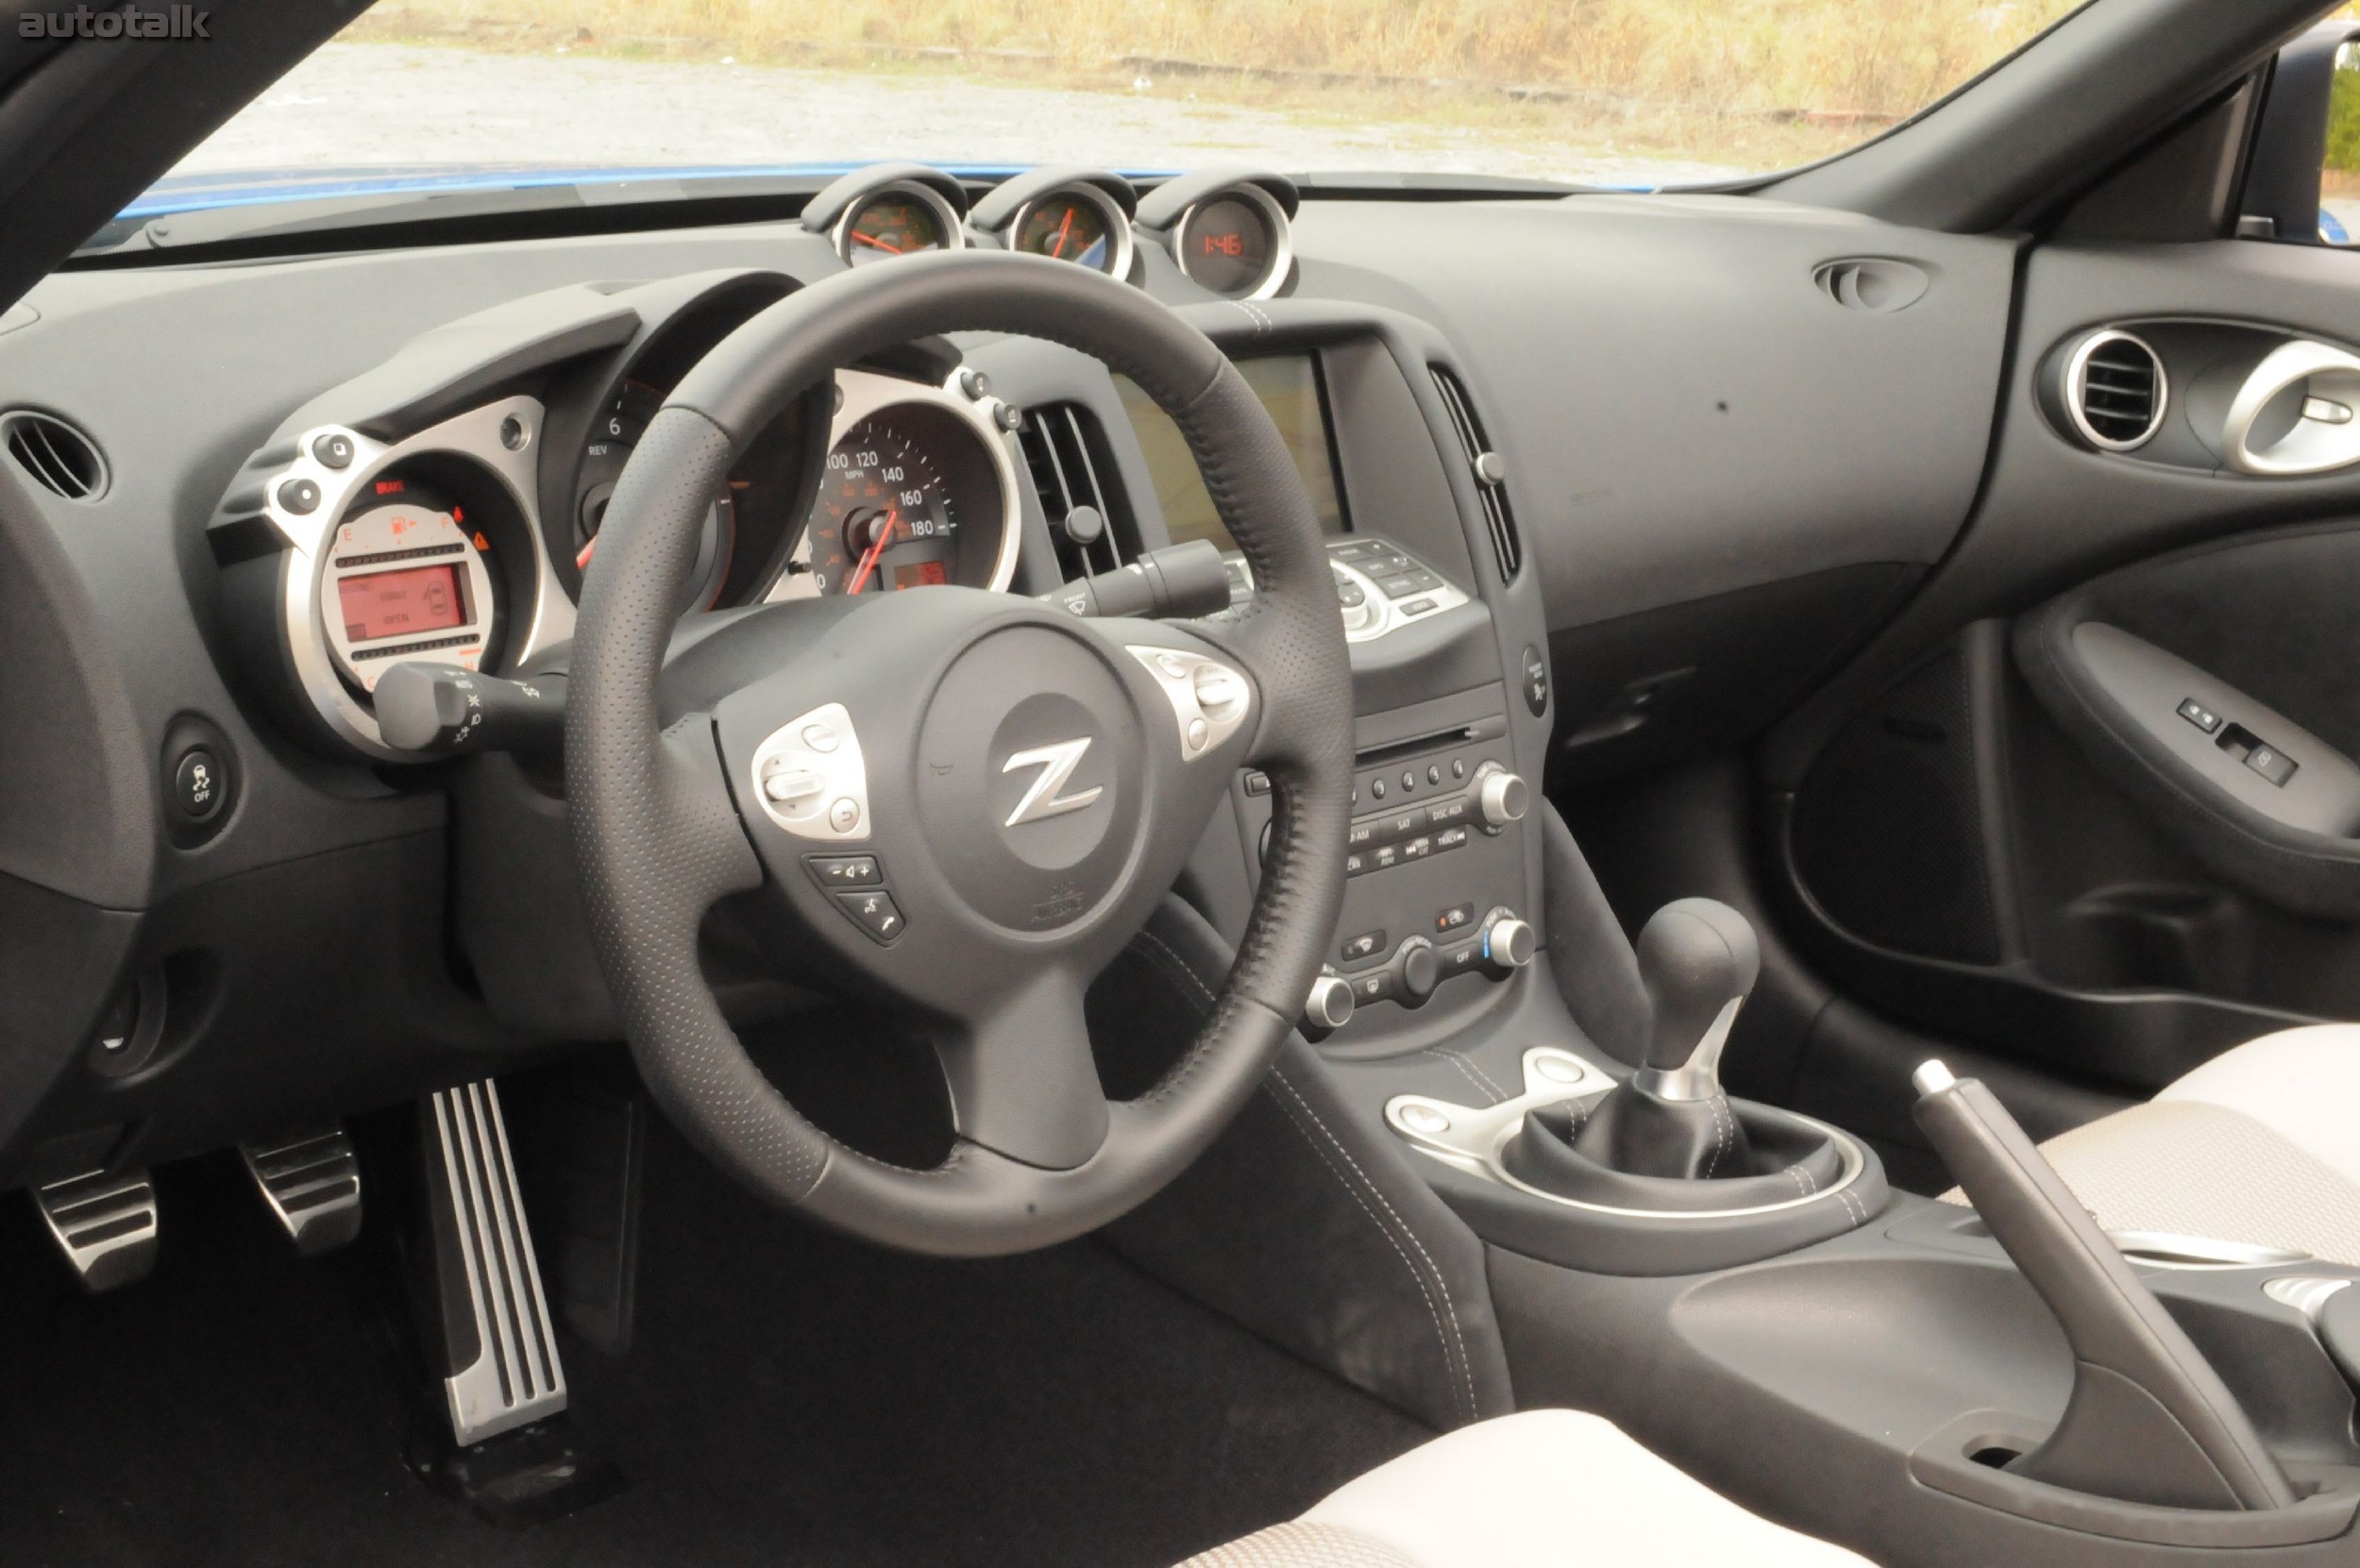 2011 Nissan 370Z Roadster Review